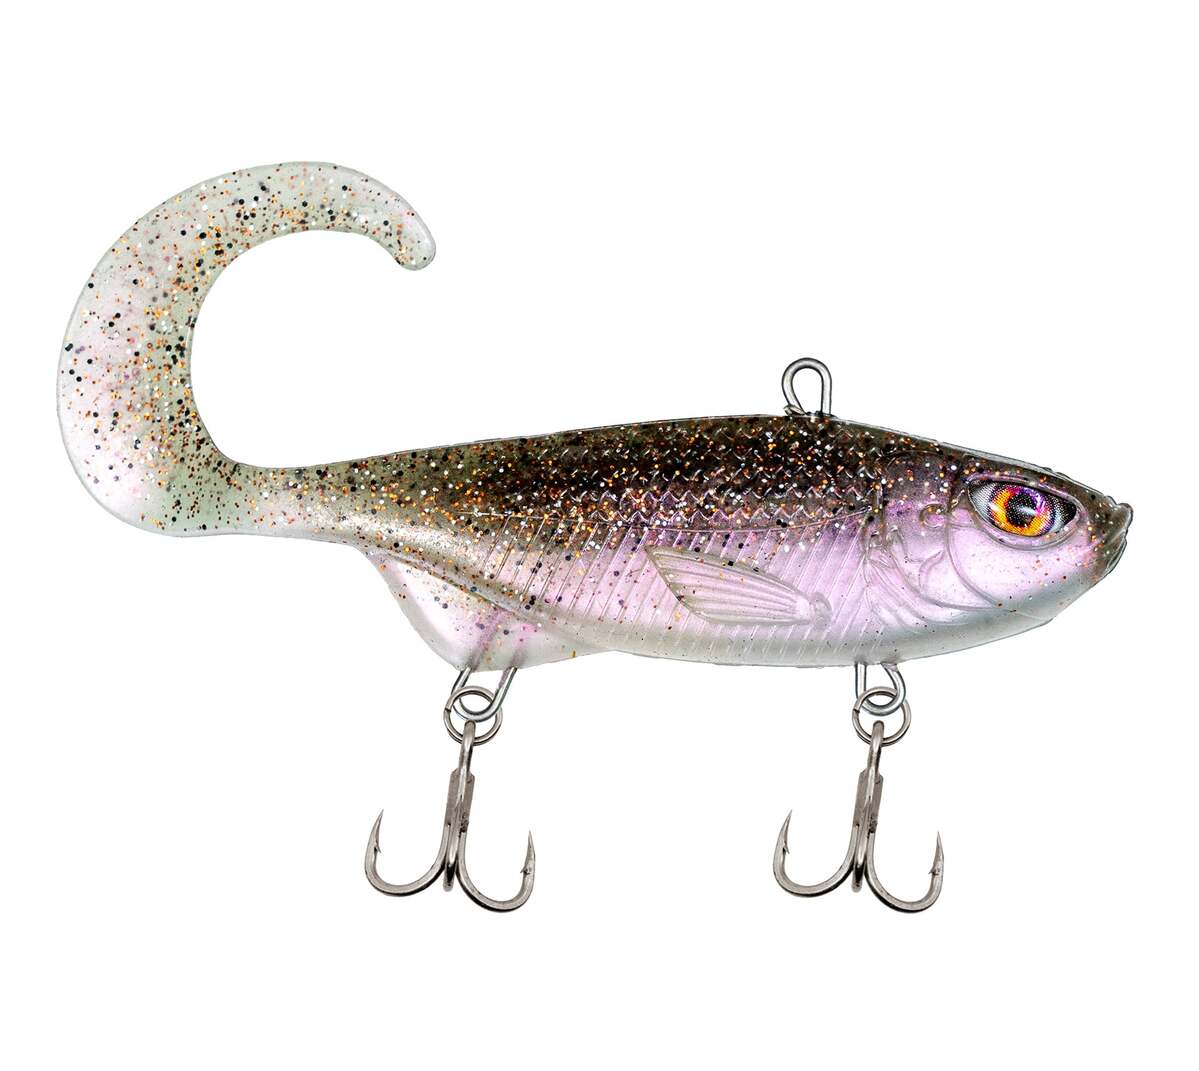 Chasebaits Flexi Frogs